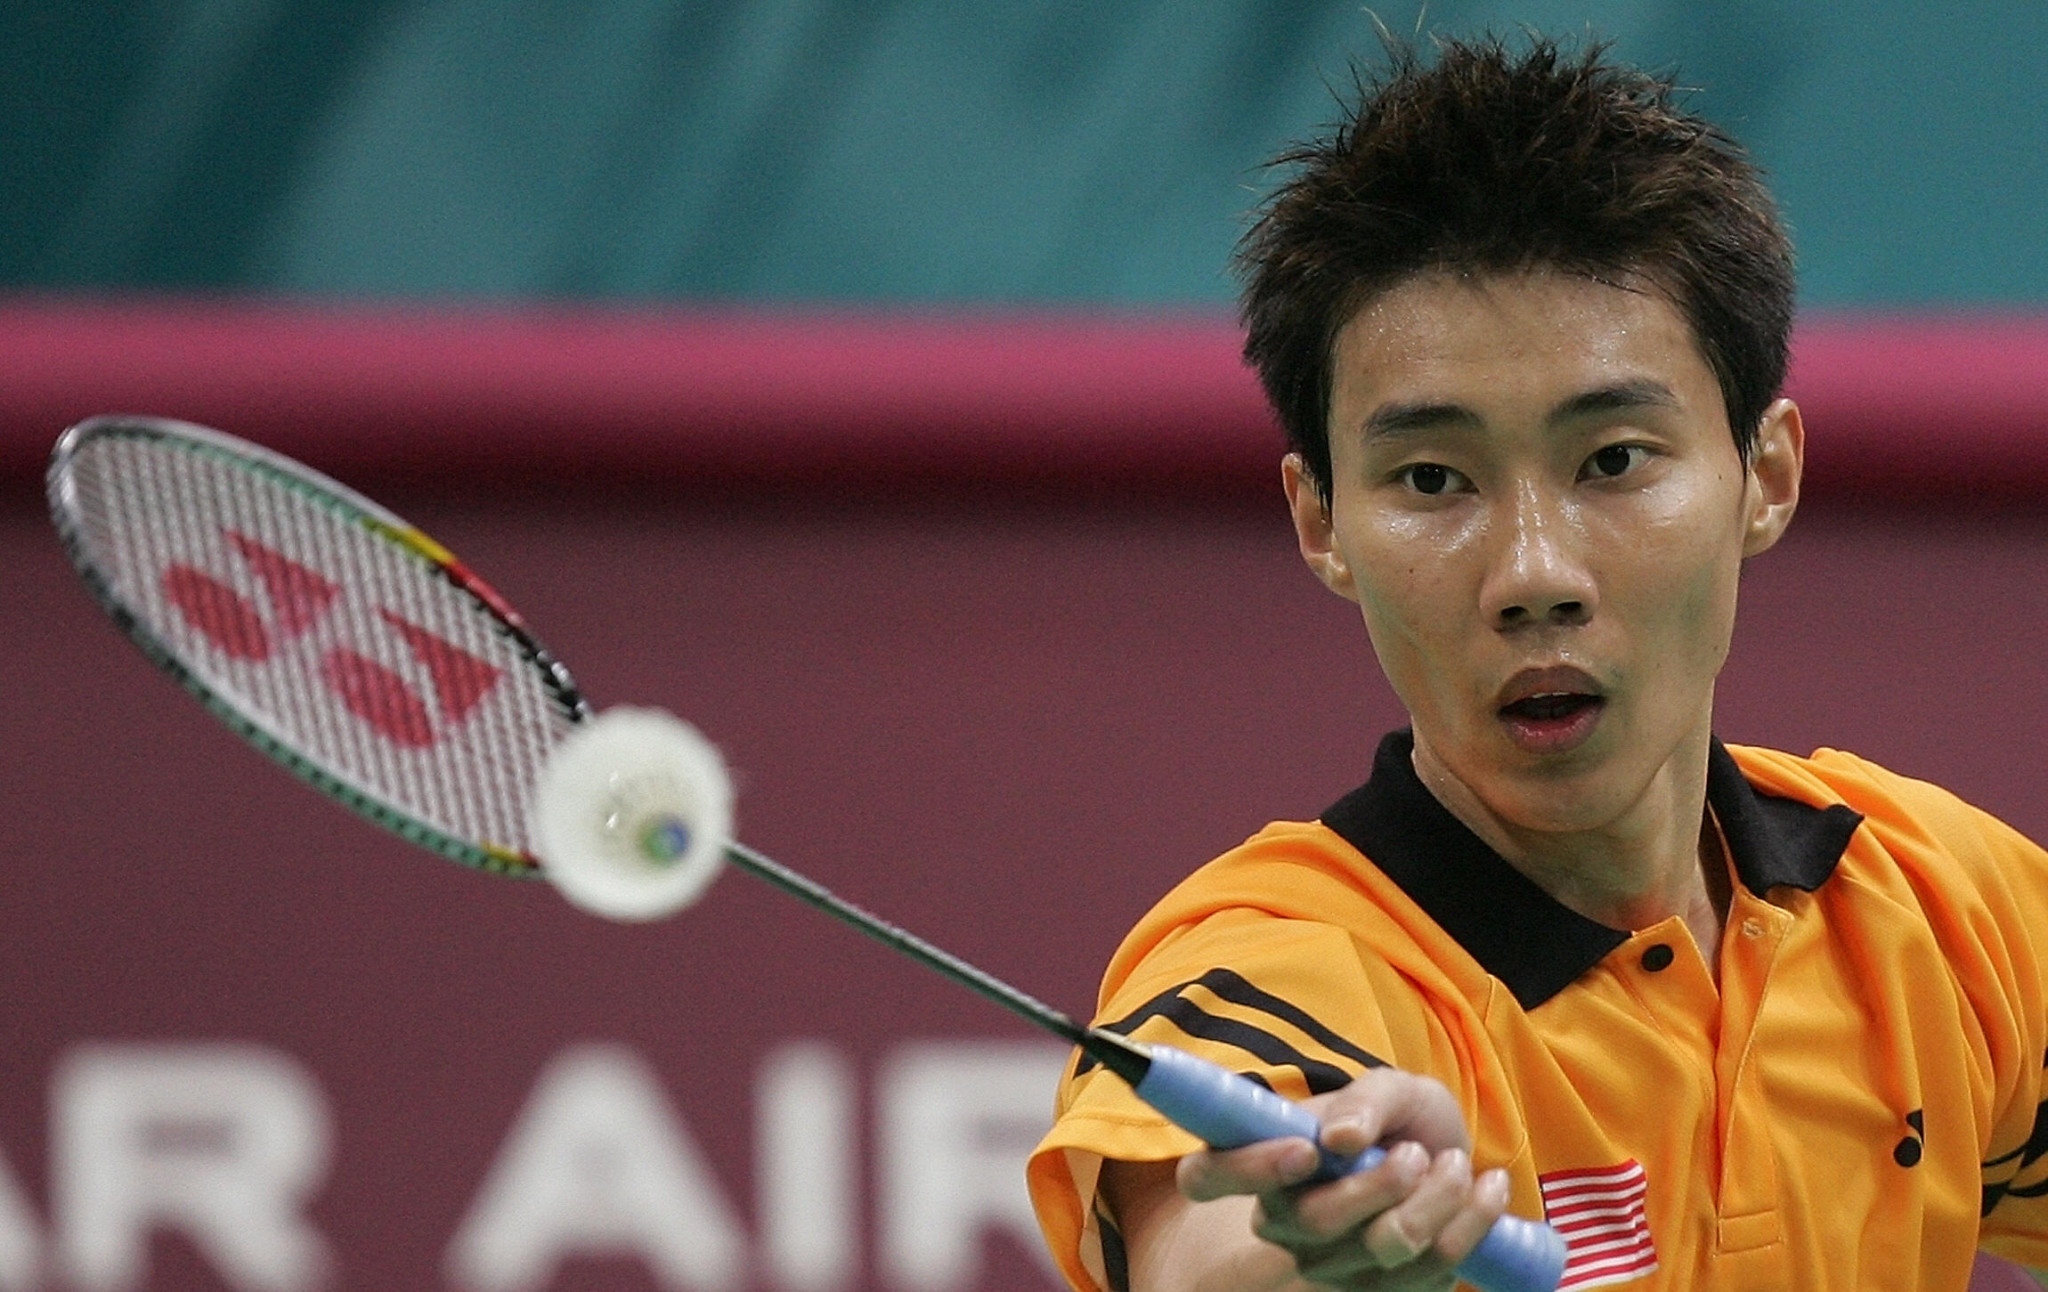 Lee Chong Wei won bronze in the men's singles and men's team events at the 2006 Asian Games in Doha ©Getty Images